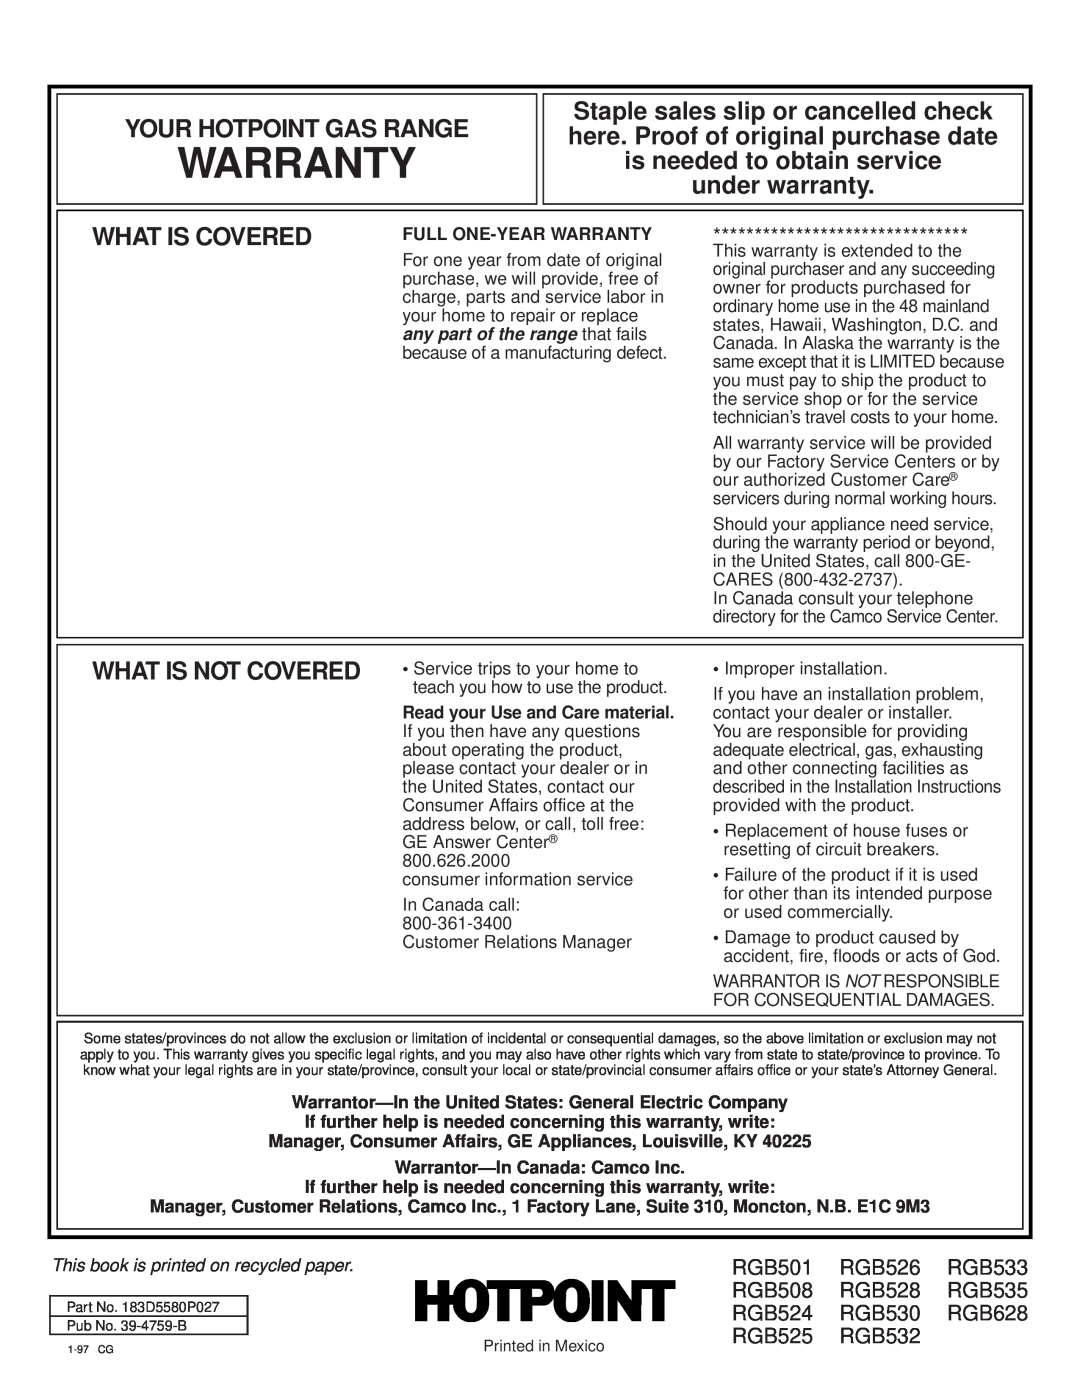 Hotpoint RGB628, RGB535, RGB533 Warranty, Your Hotpoint Gas Range, under warranty, What Is Covered, What Is Not Covered 